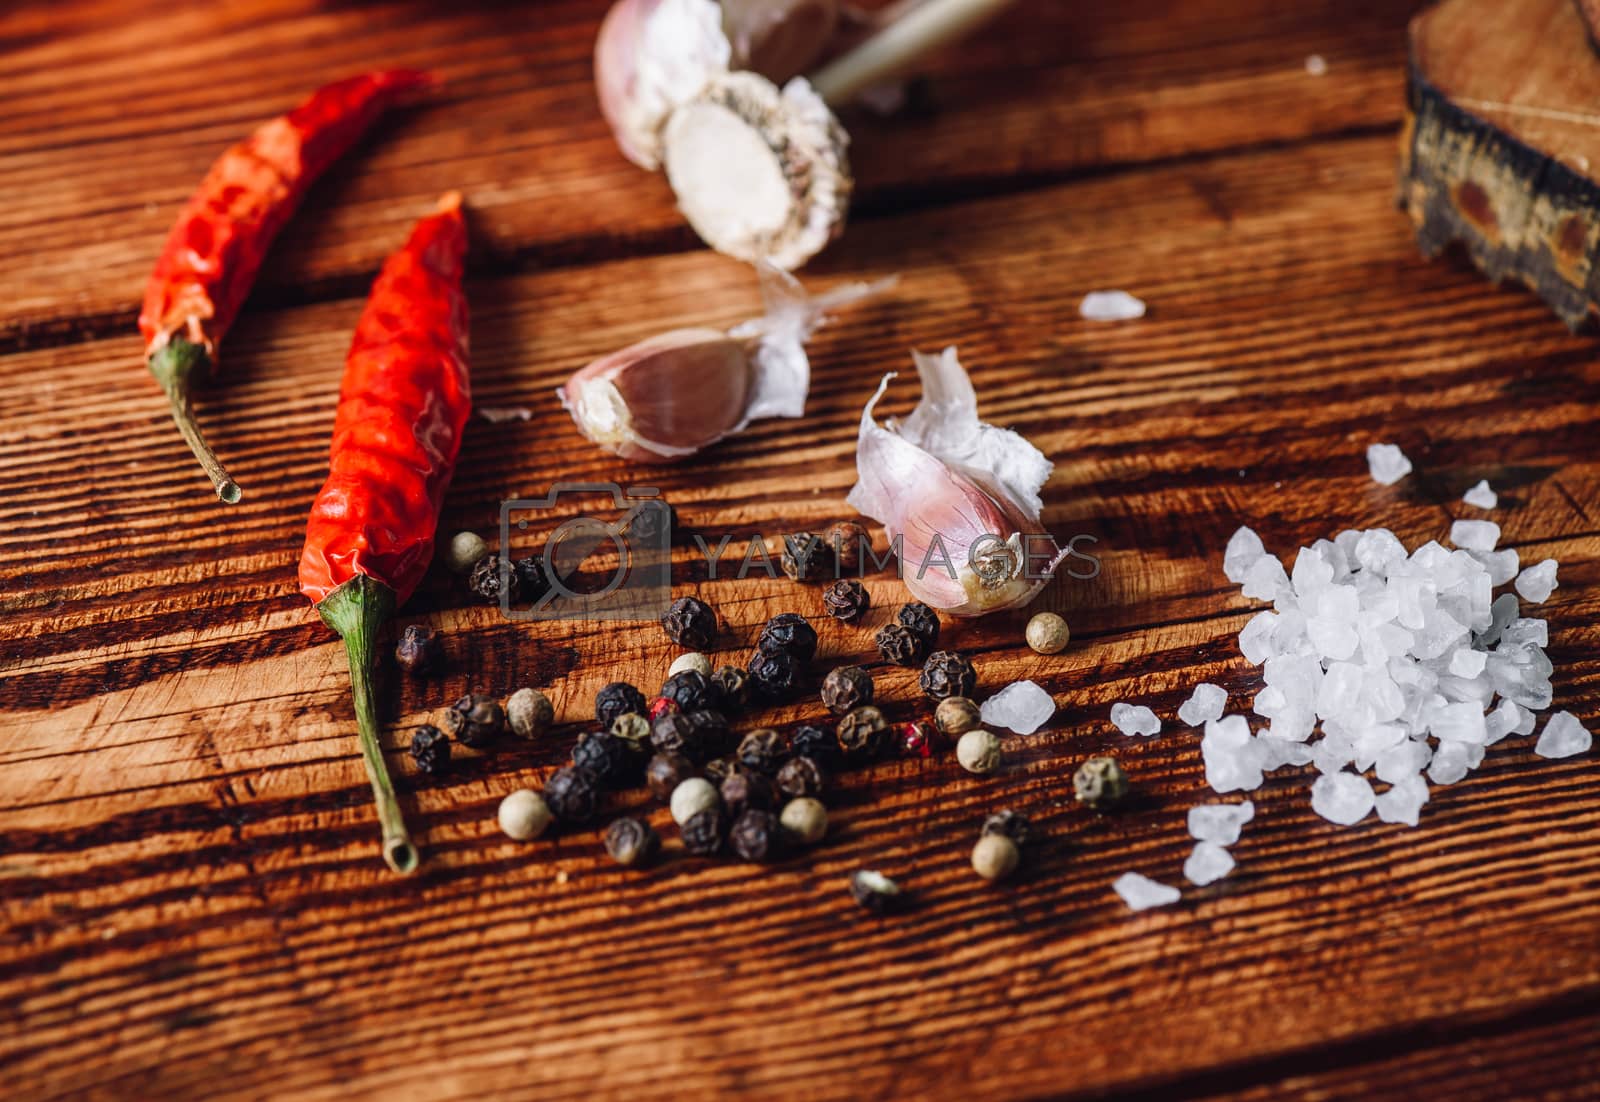 Royalty free image of Some condiment on wooden table by Seva_blsv